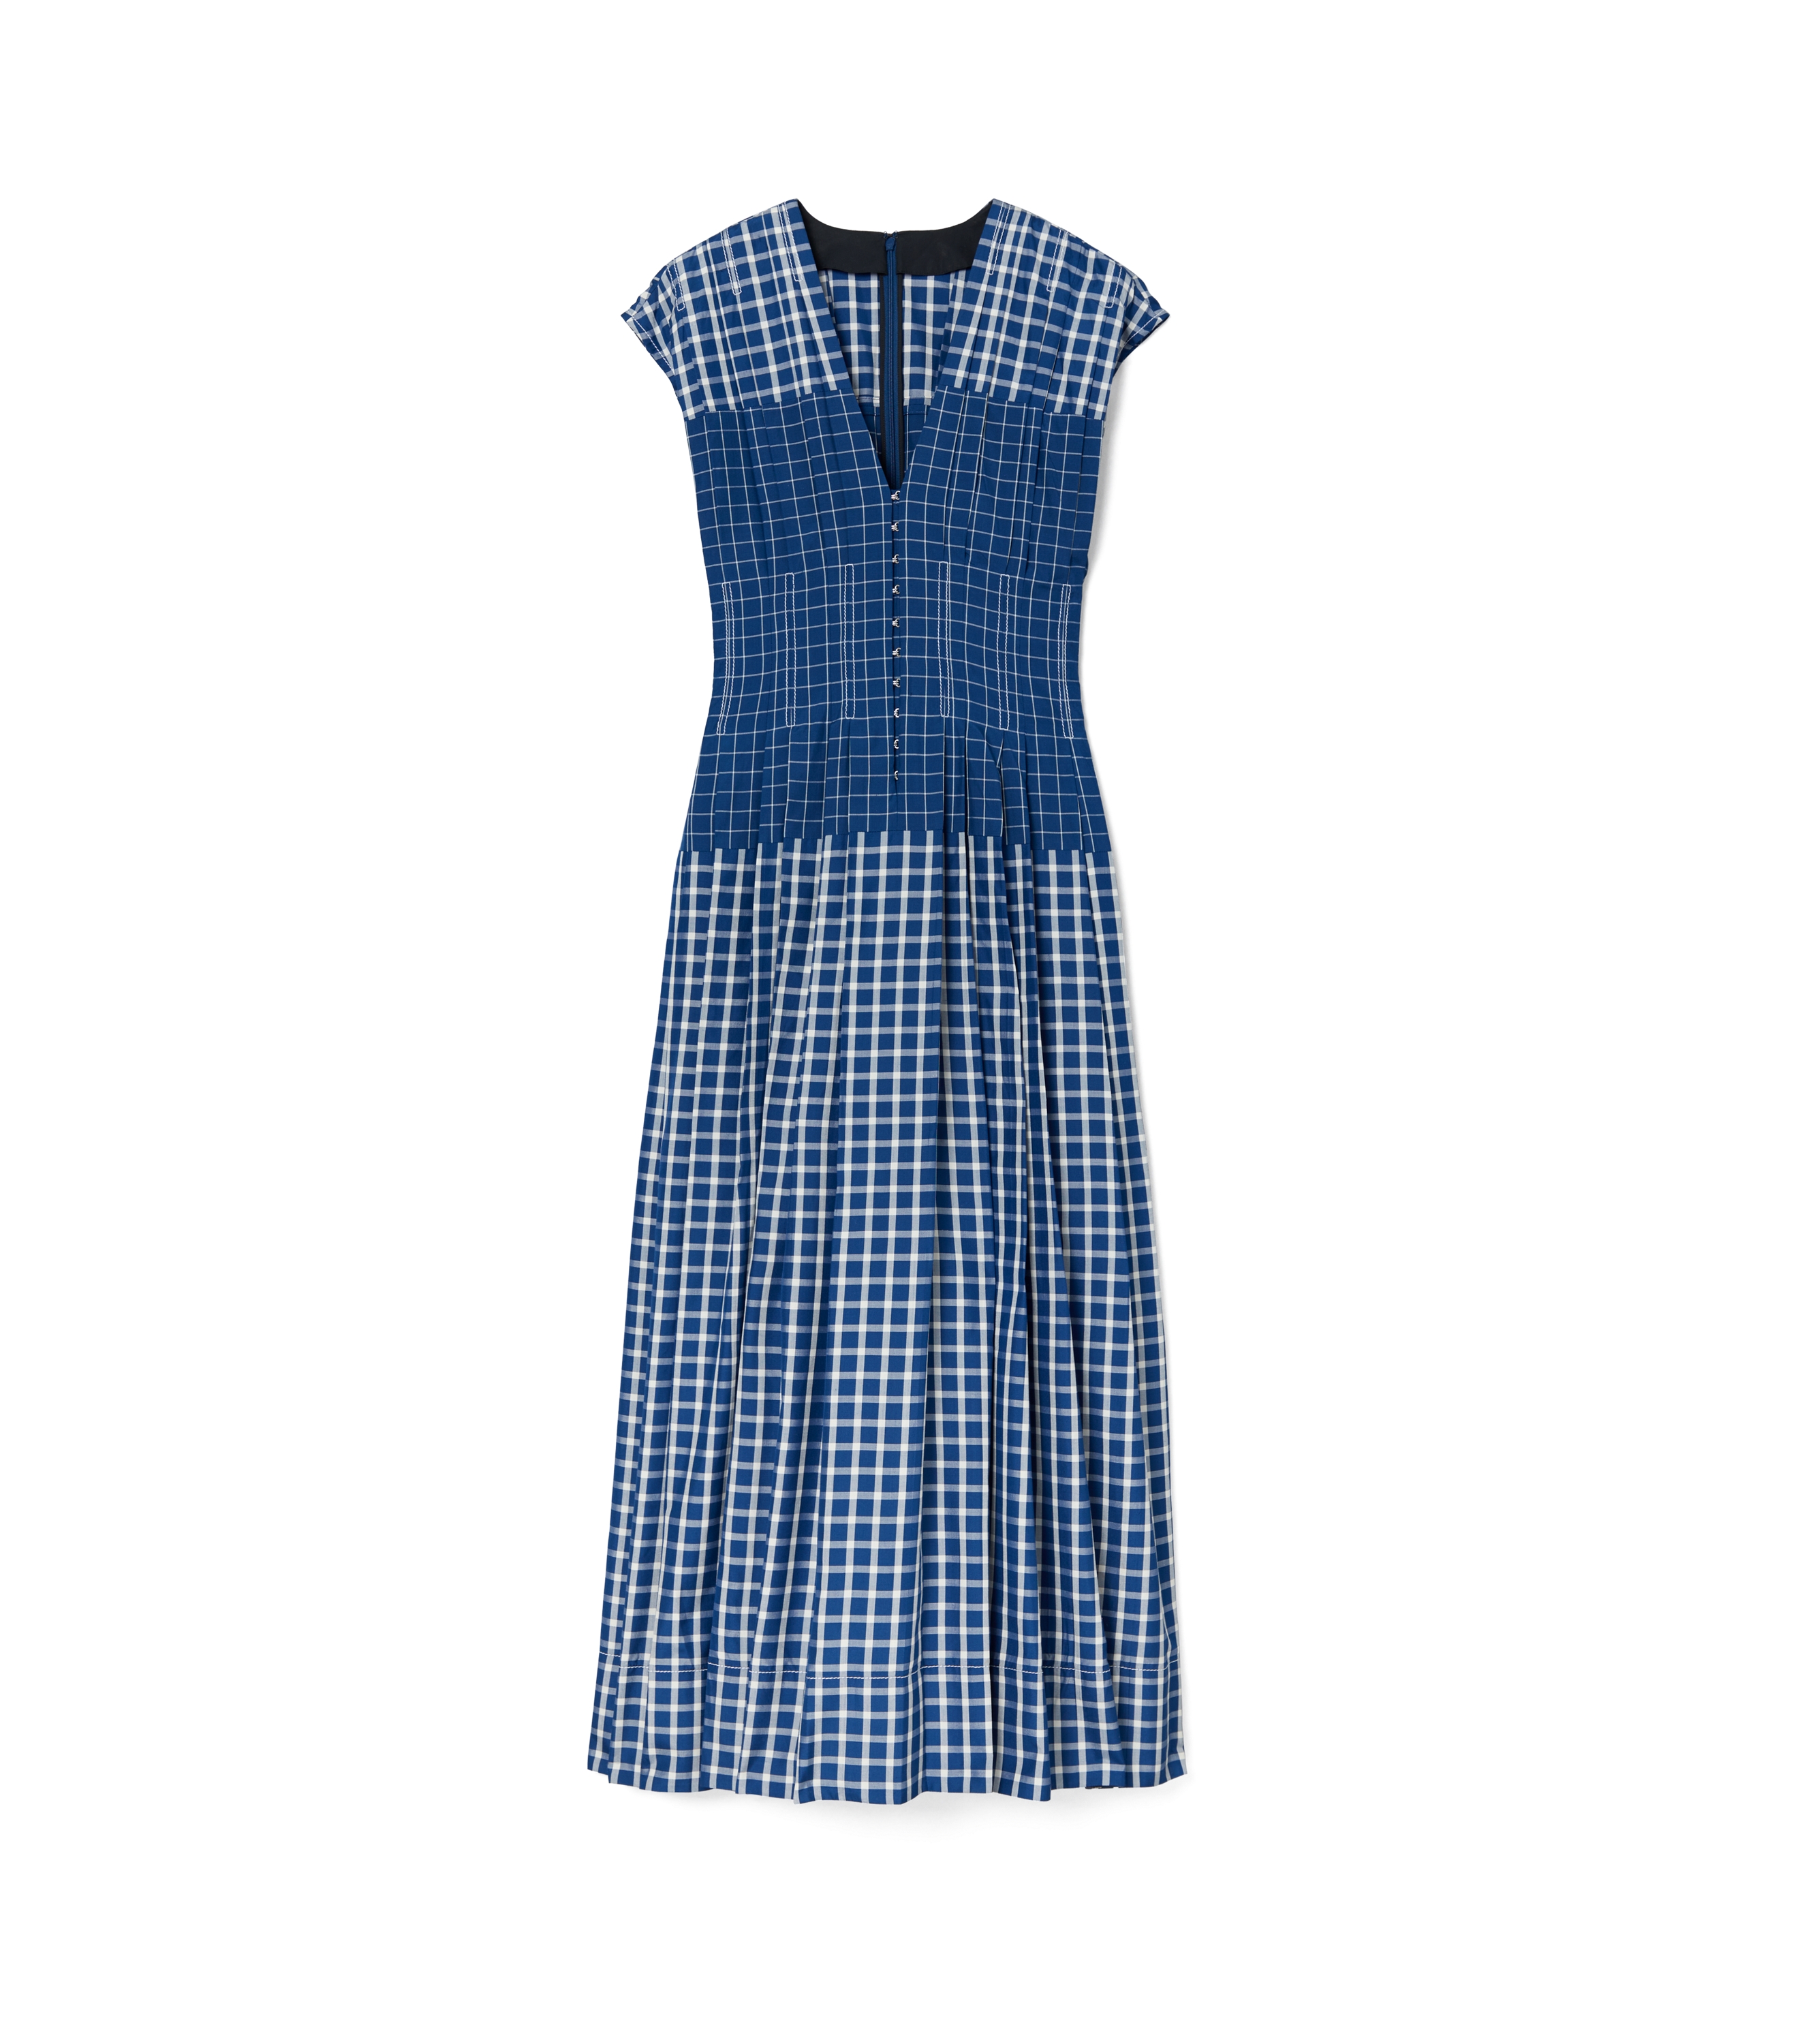 Tory Burch Picnic Plaid Silk Claire McCardell Dress